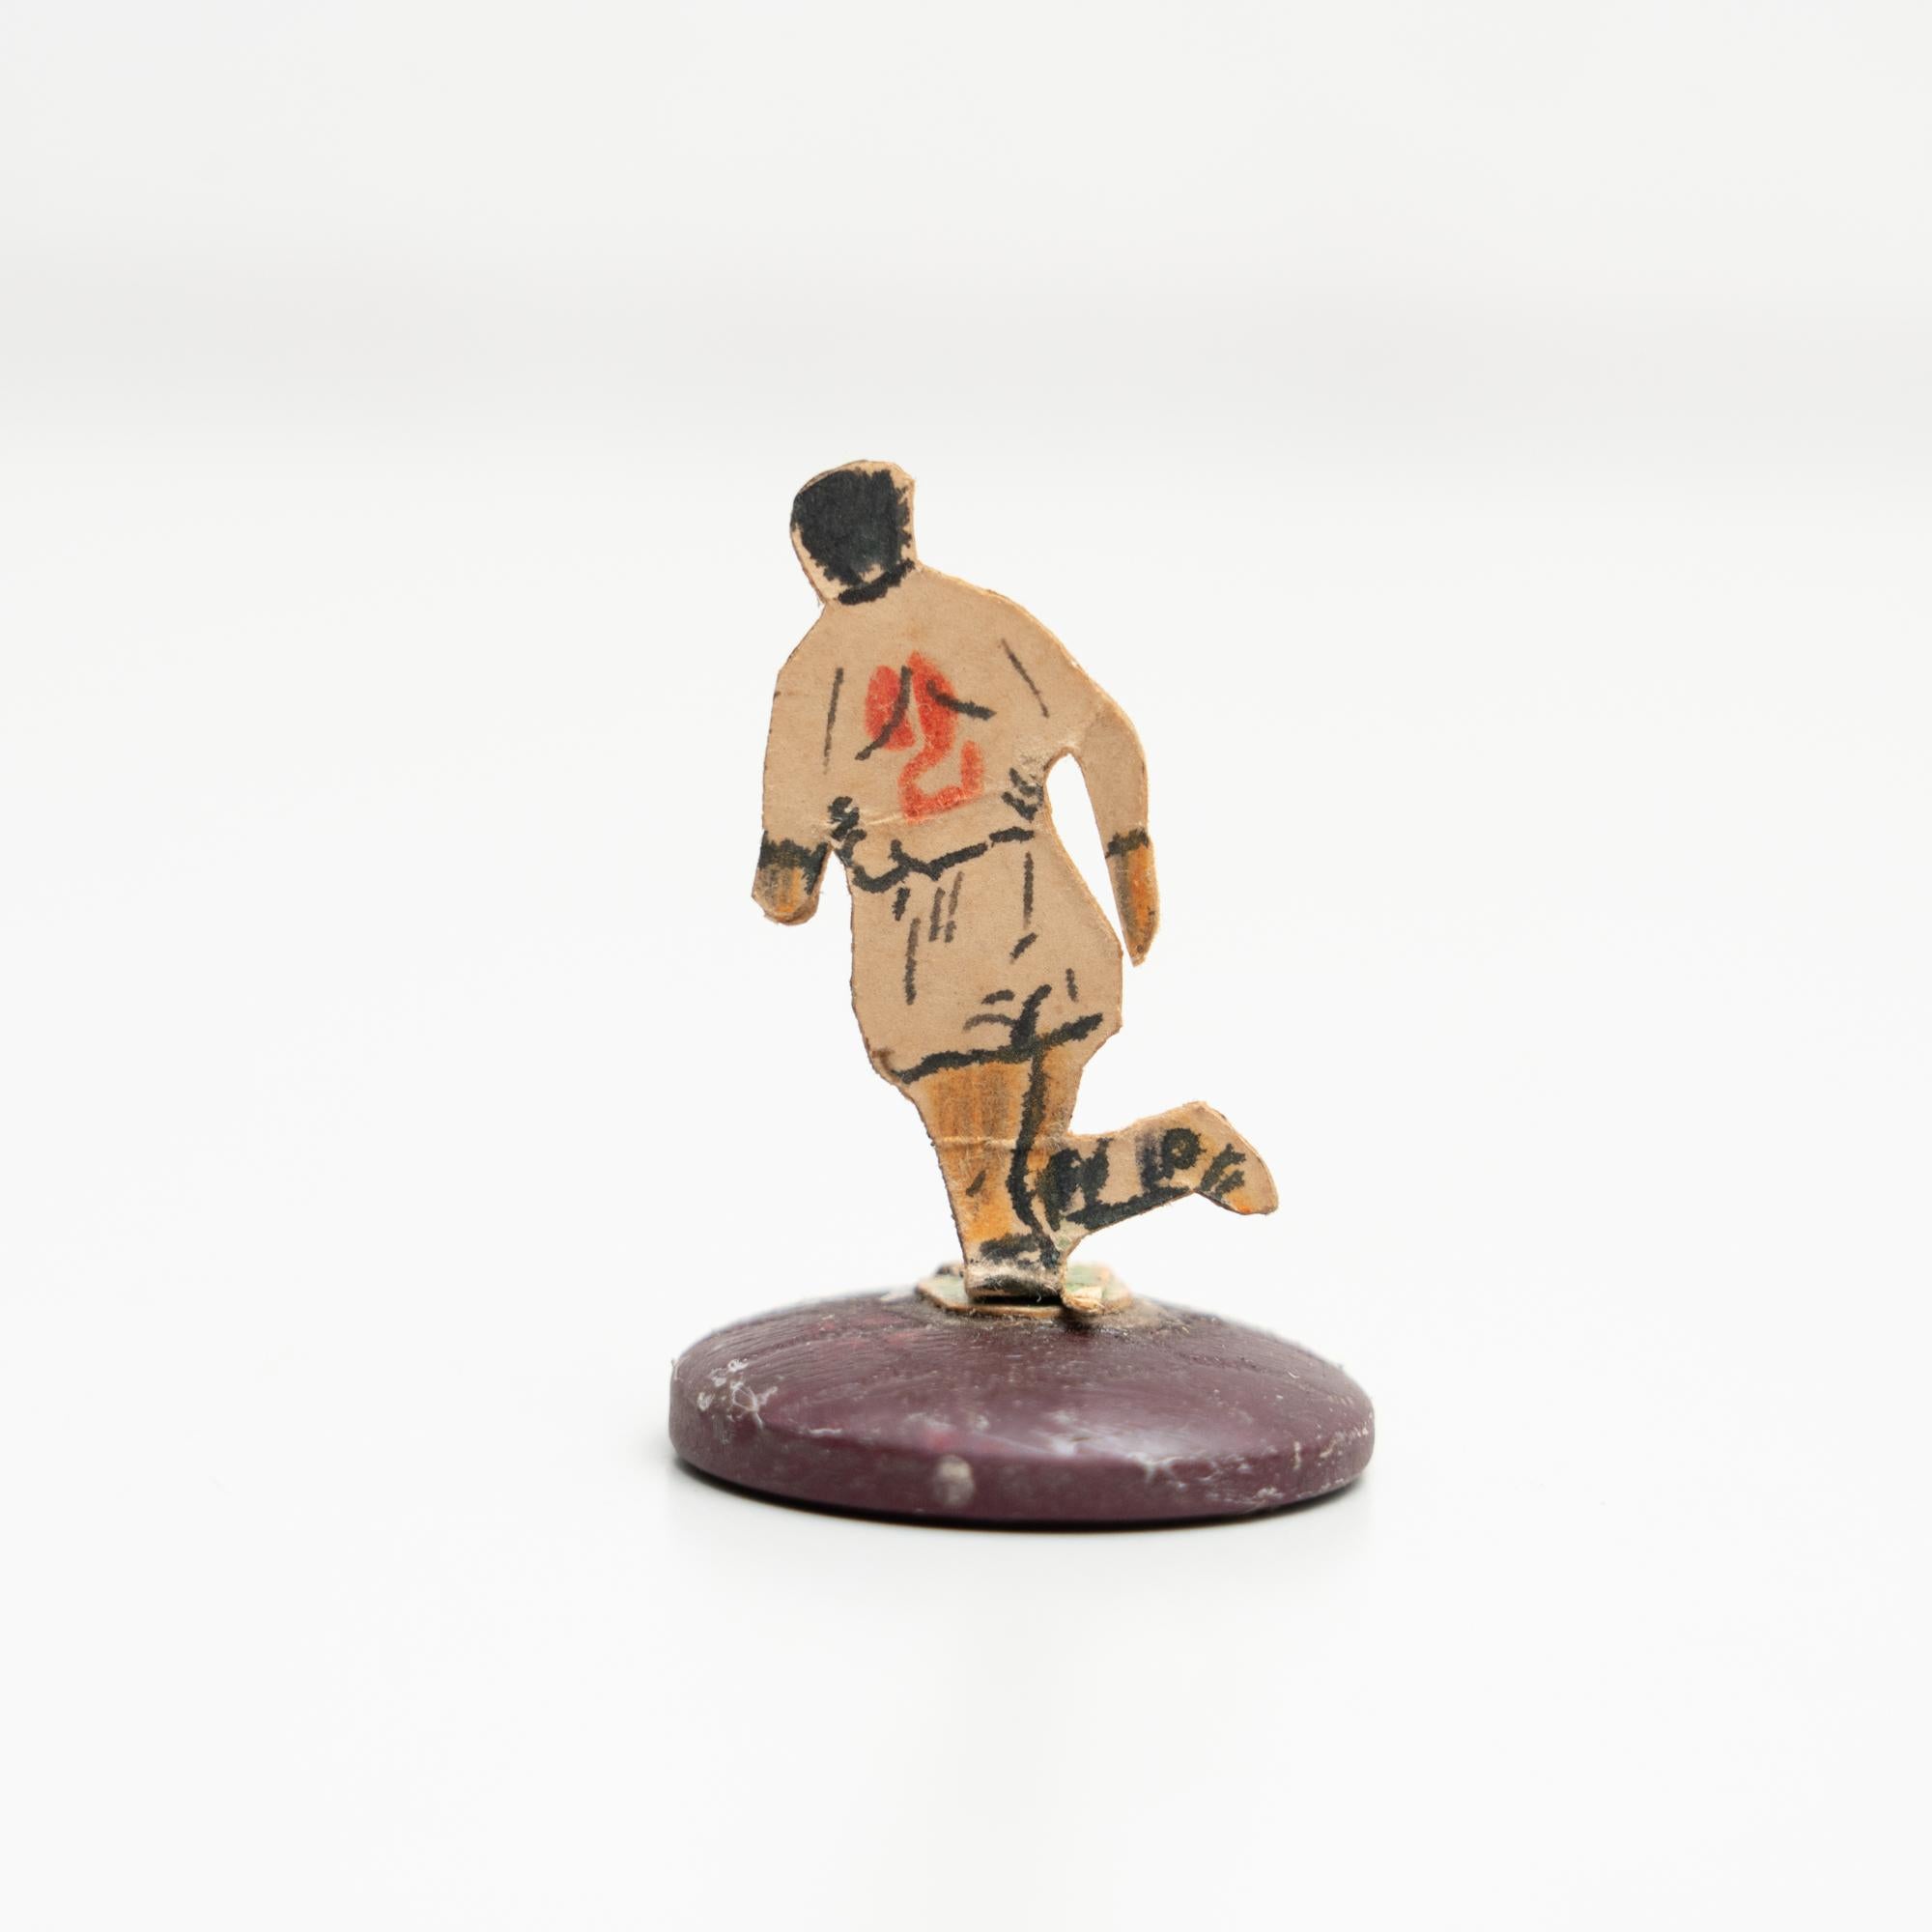 Spanish Set of 2 Traditional Antique Button Soccer Game Figures, circa 1950 For Sale